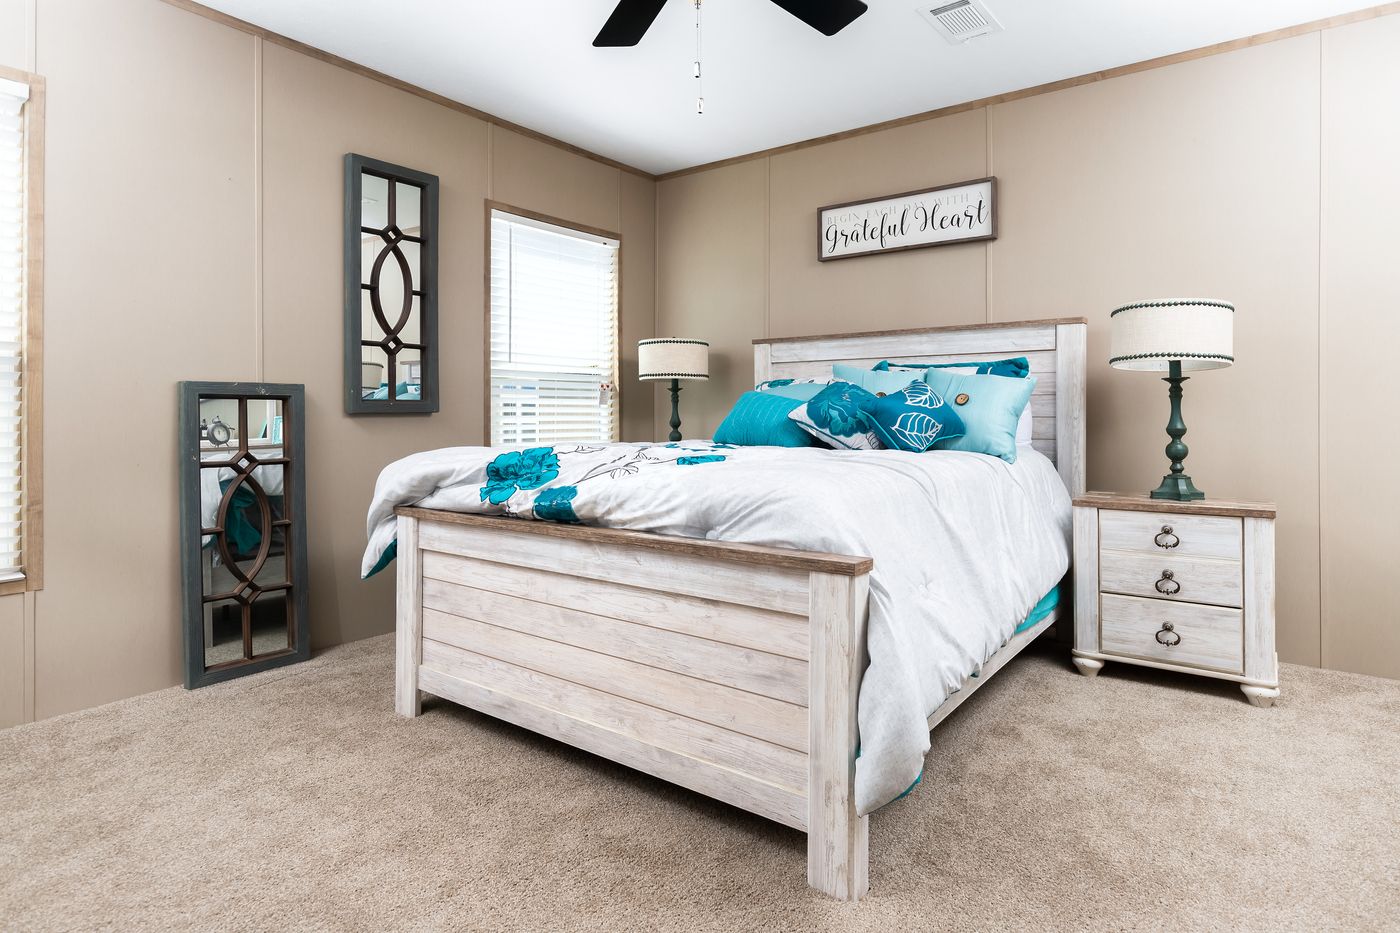 The FARMHOUSE FLEX Primary Bedroom. This Manufactured Mobile Home features 3 bedrooms and 2.5 baths.